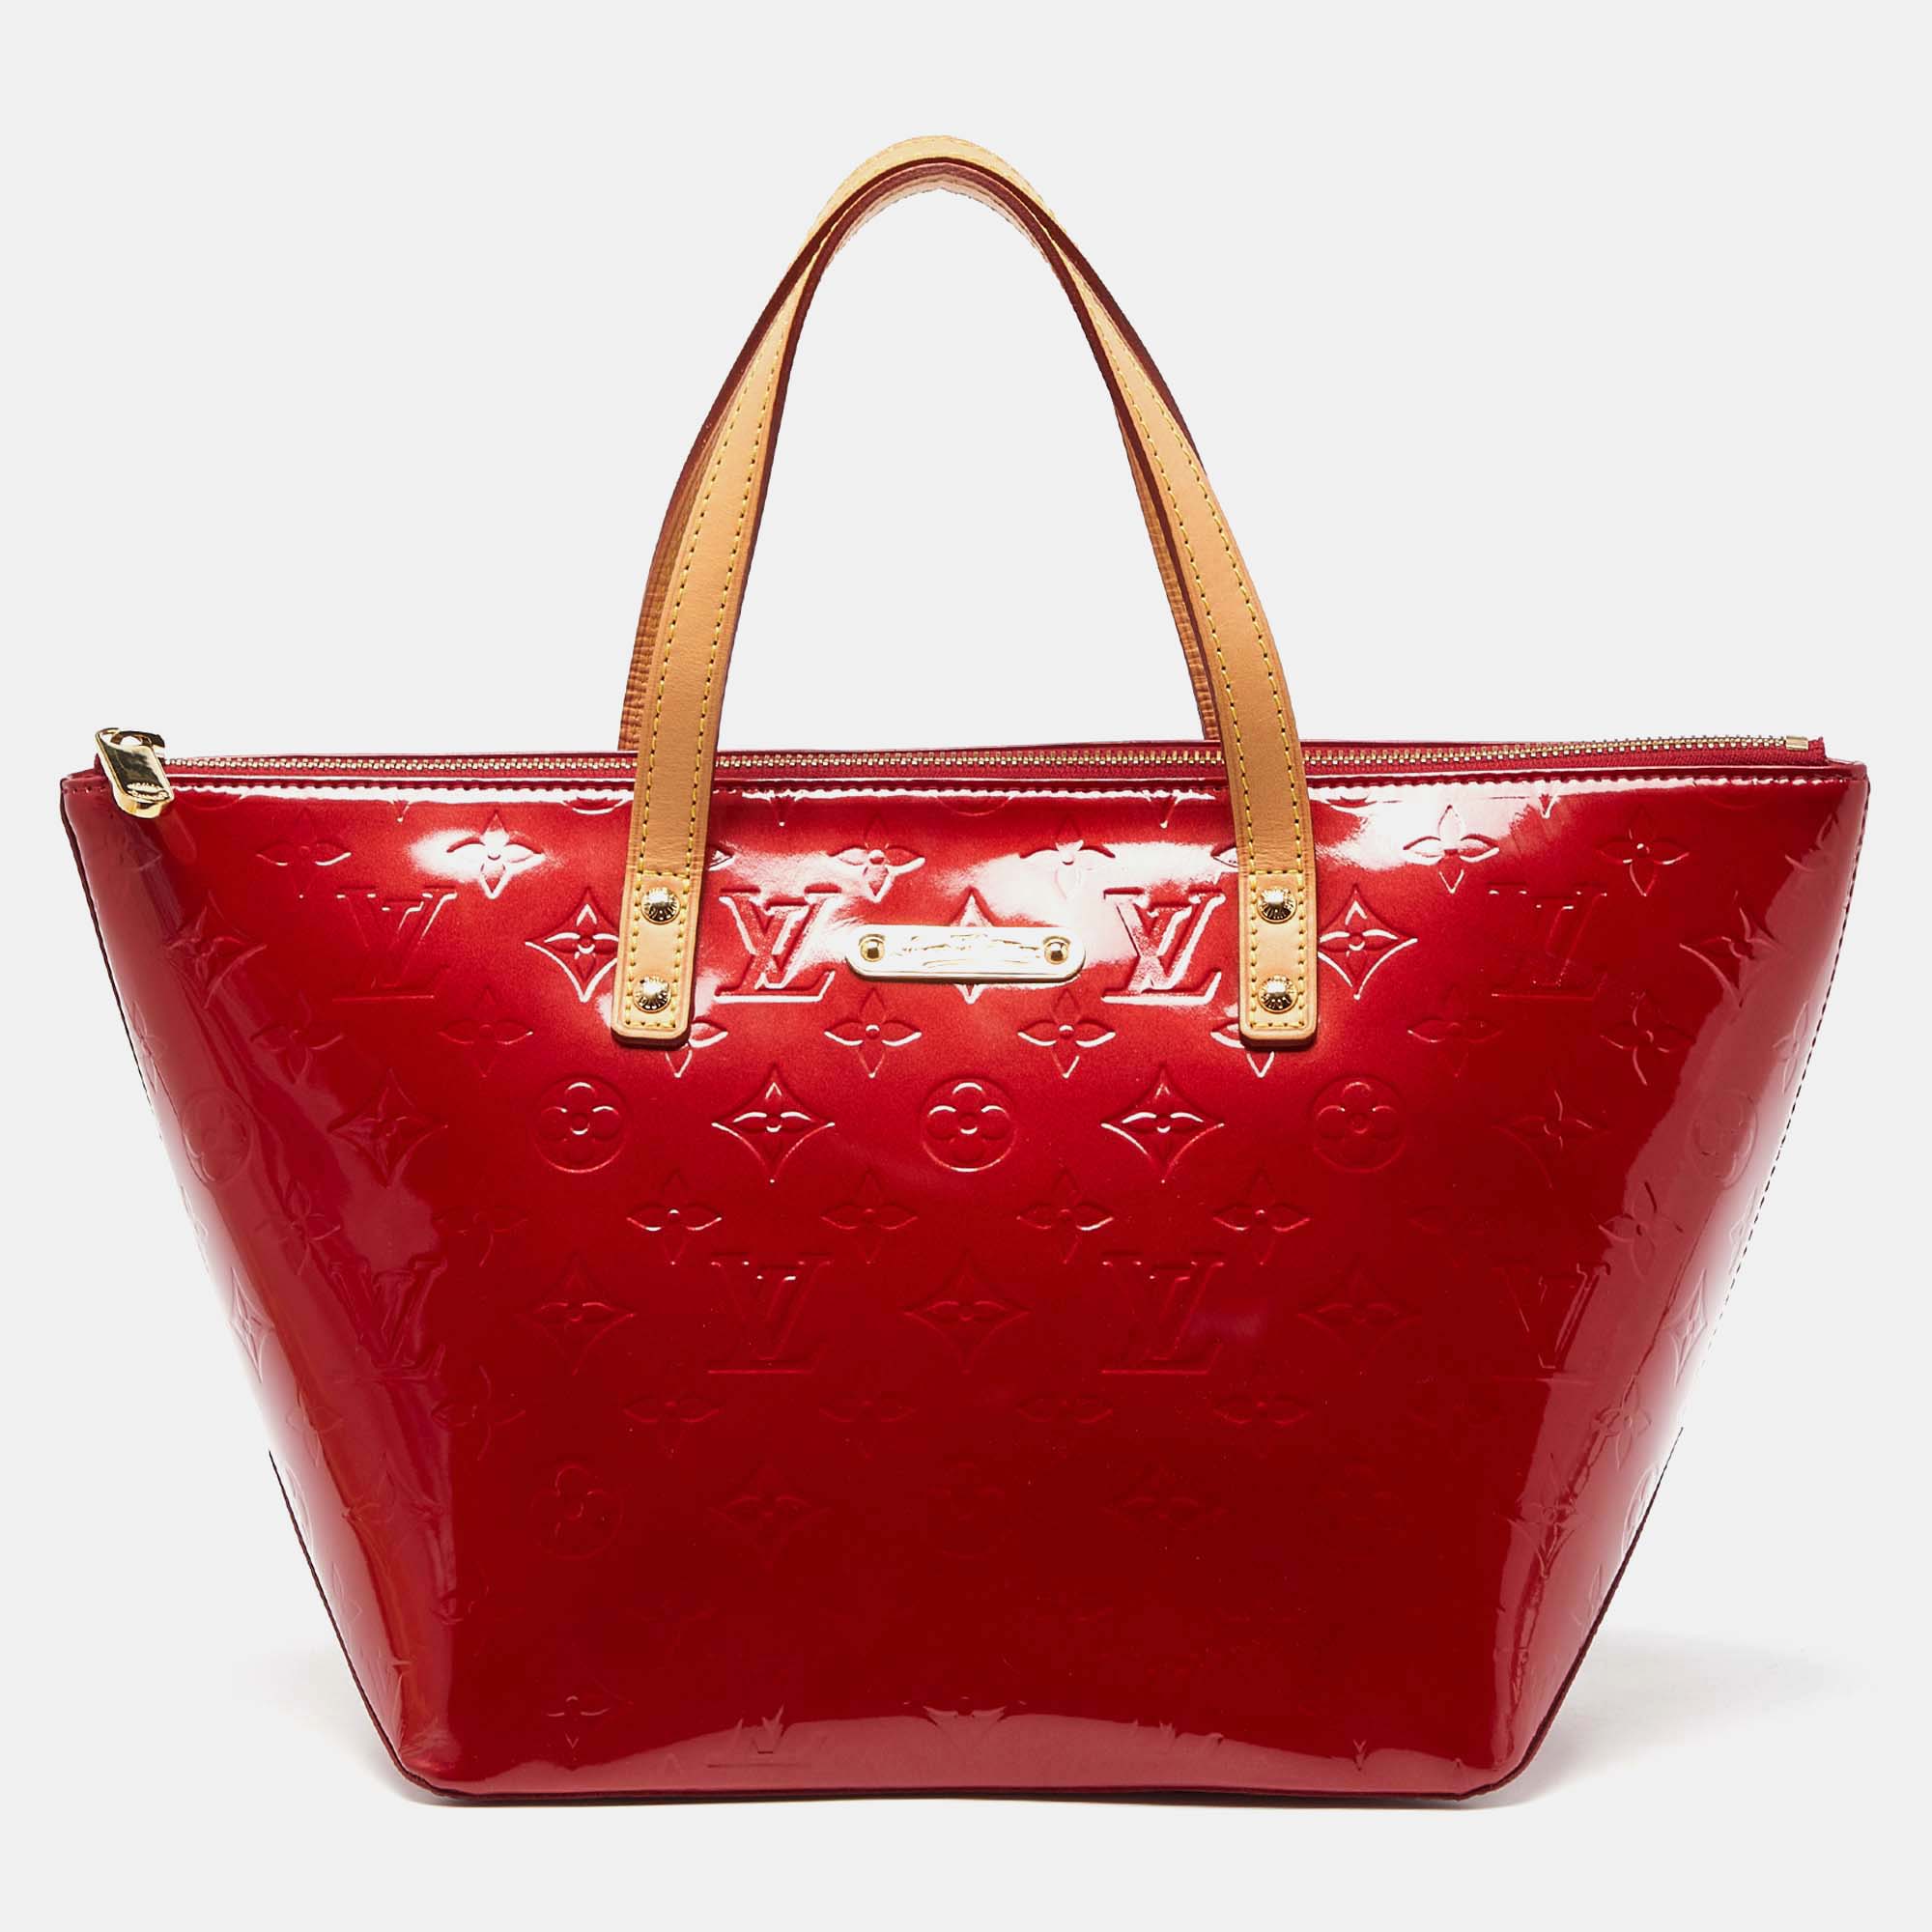 Pre-owned Louis Vuitton Pomme D'amour Monogram Vernis Bellevue Pm Bag In Red